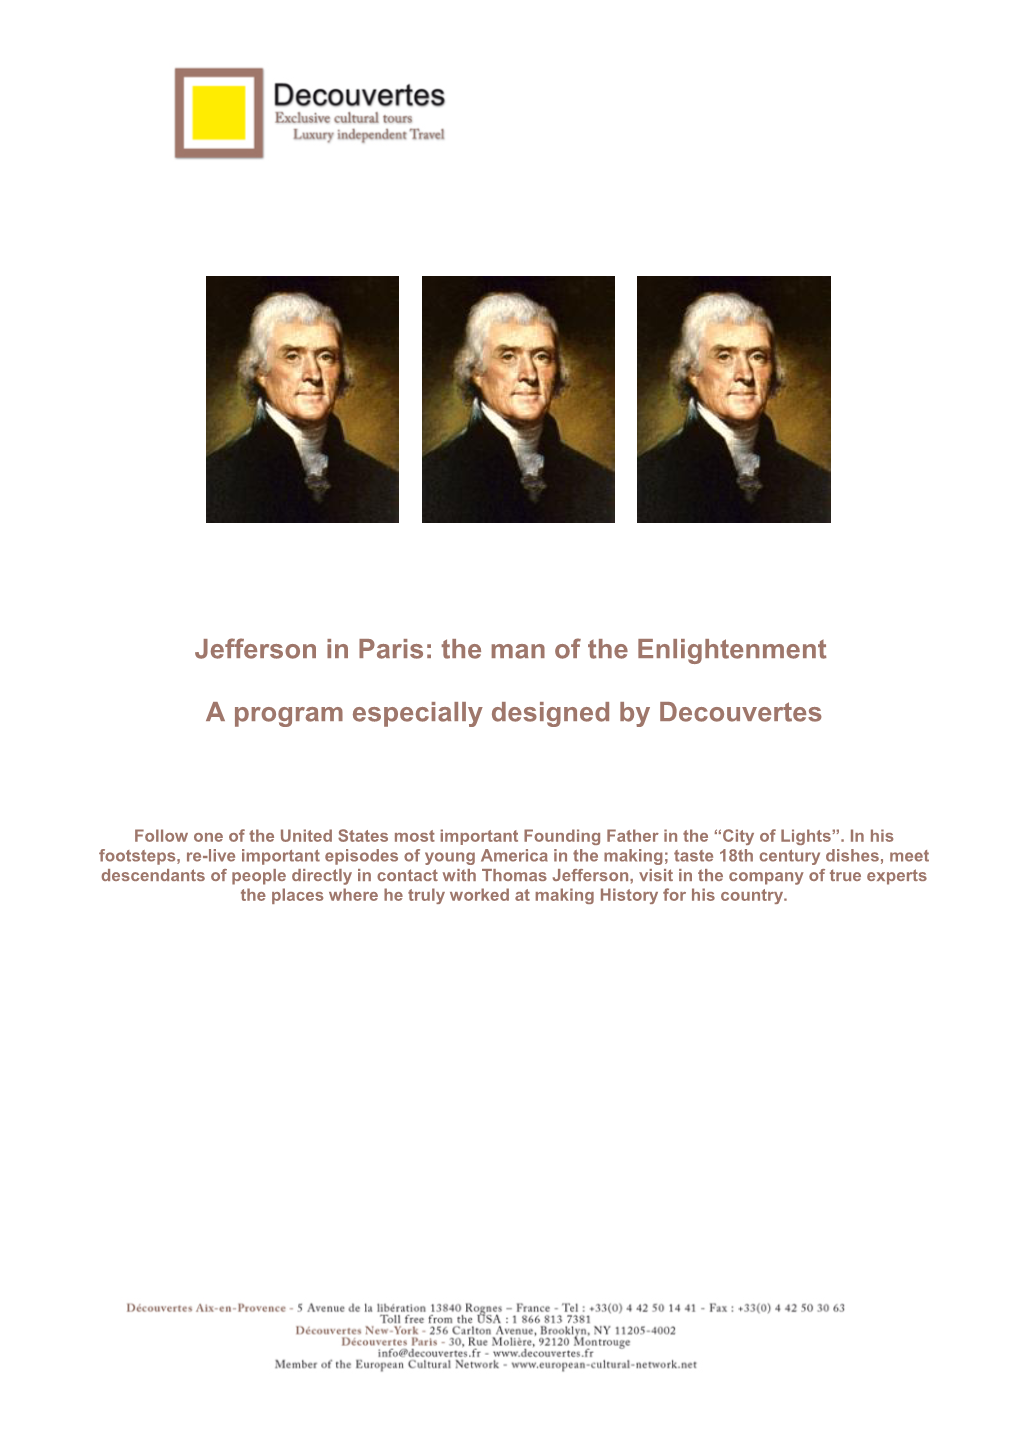 Jefferson in Paris: the Man of the Enlightenment a Program Especially Designed by Decouvertes